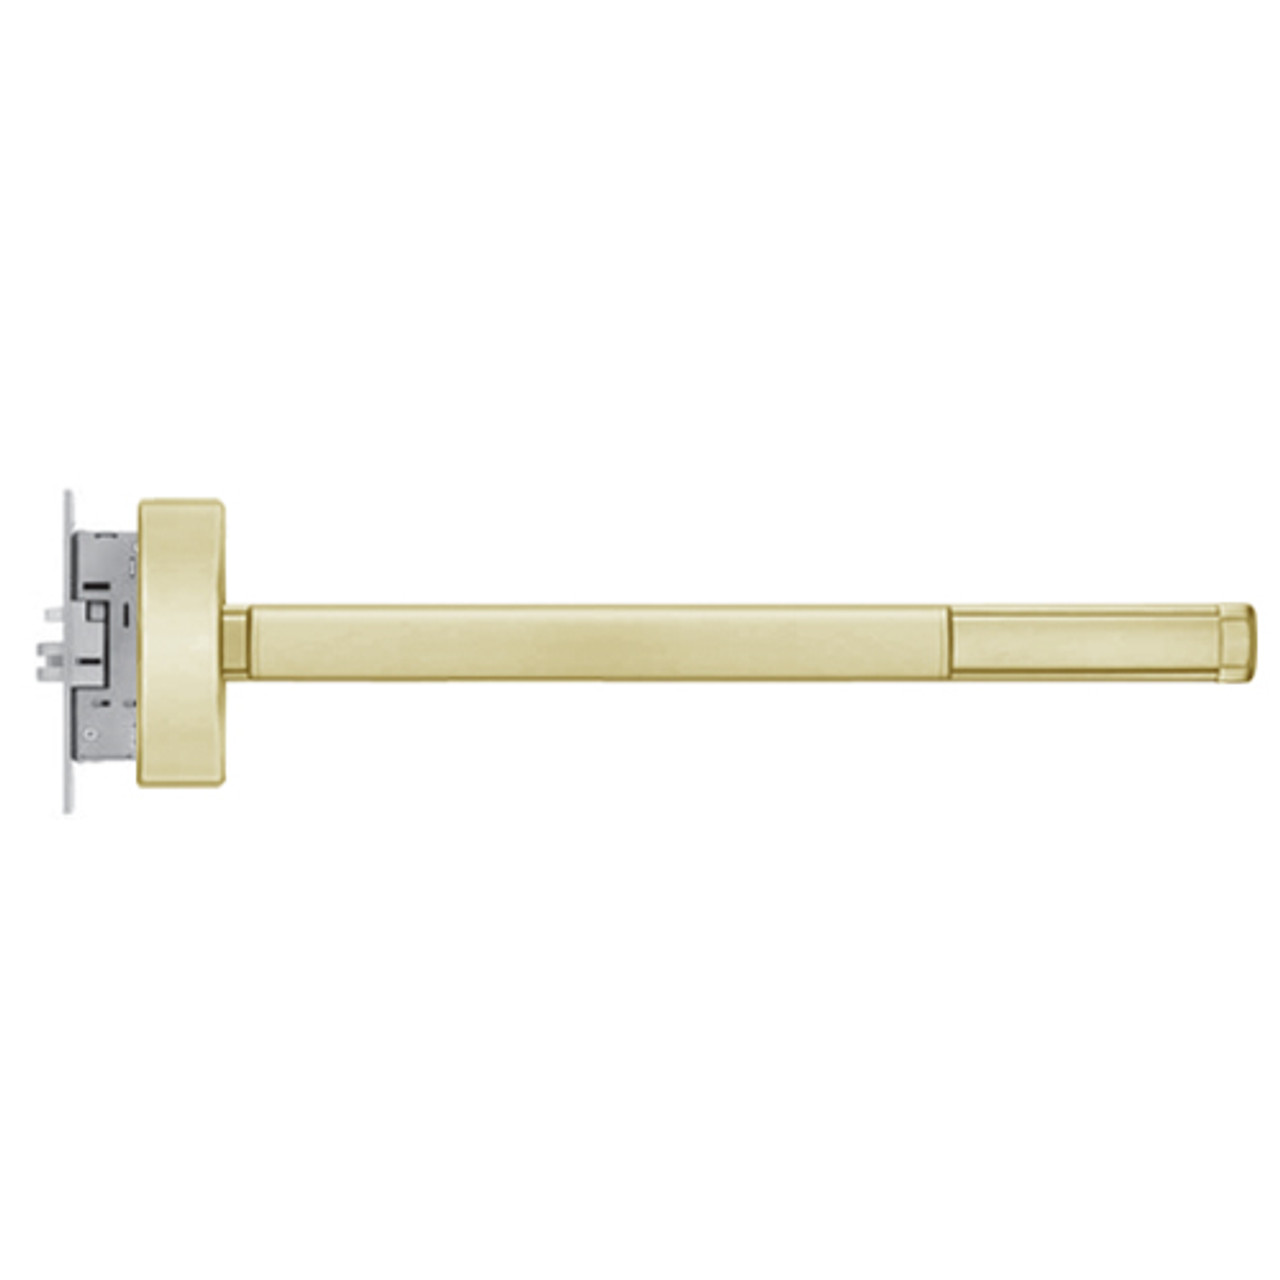 TS2303-LHR-606-36 PHI 2300 Series Apex Mortise Exit Device with Touchbar Monitoring Switch Prepped for Key Retracts Latchbolt in Satin Brass Finish